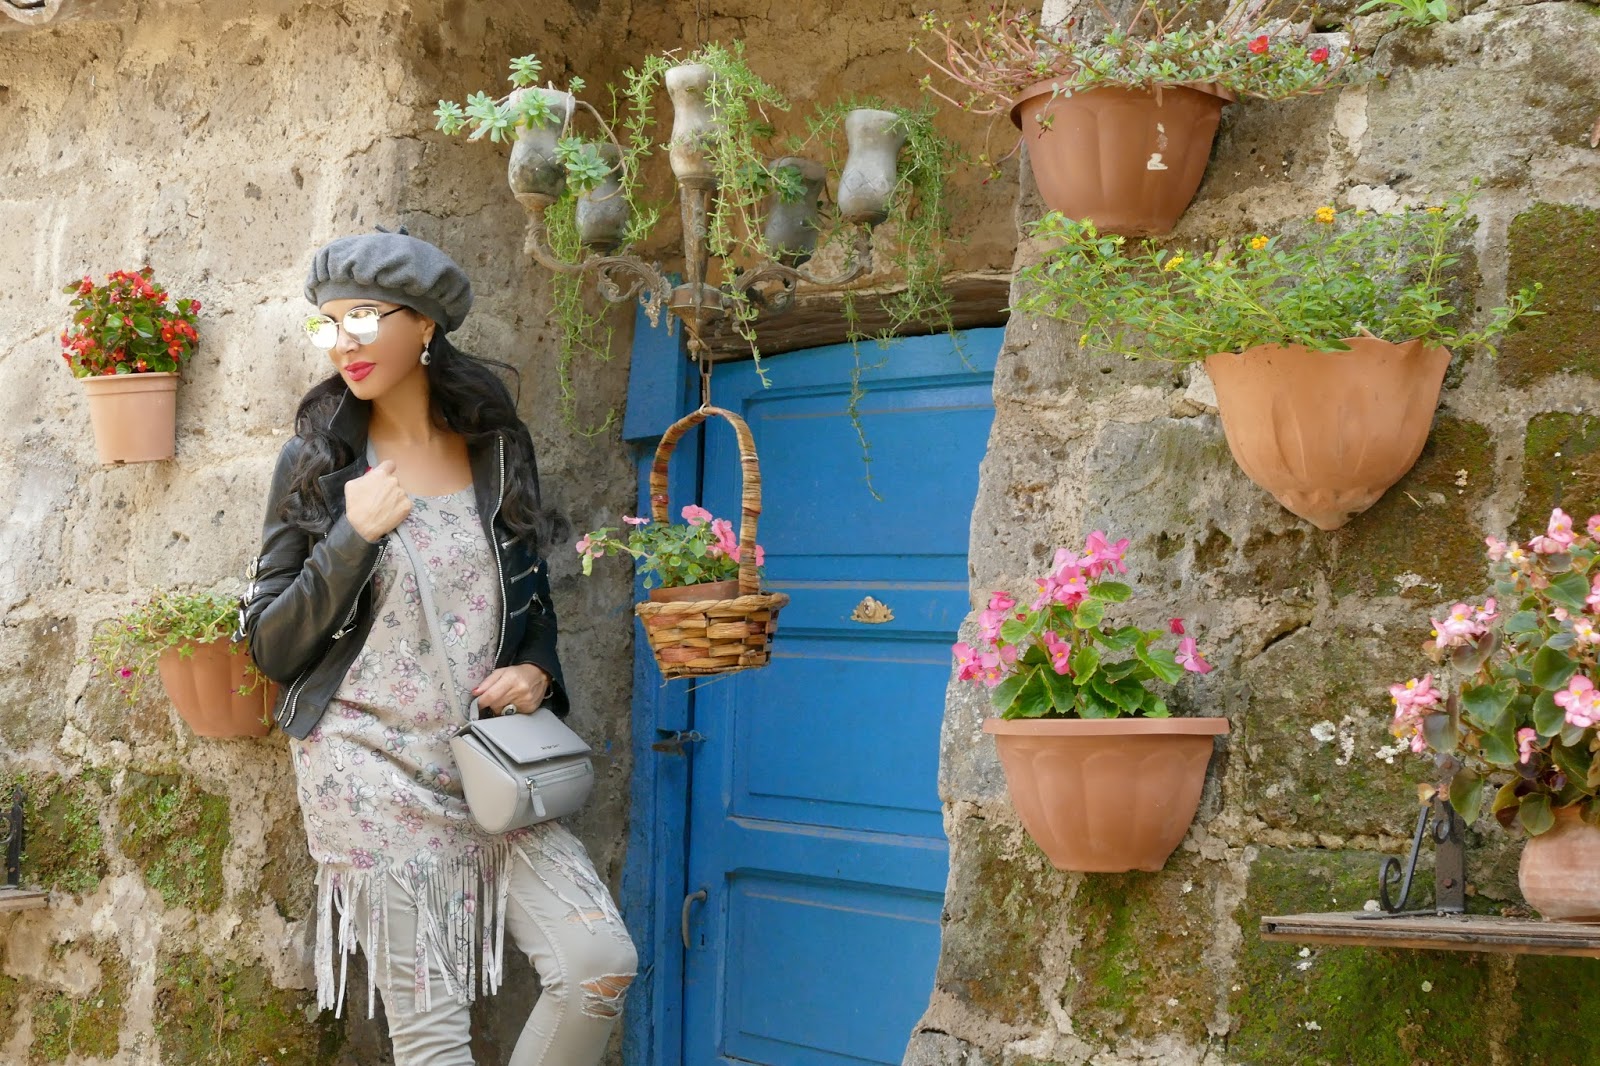 A Parisienne Touch In The Enchanting Village Of Casertavecchia